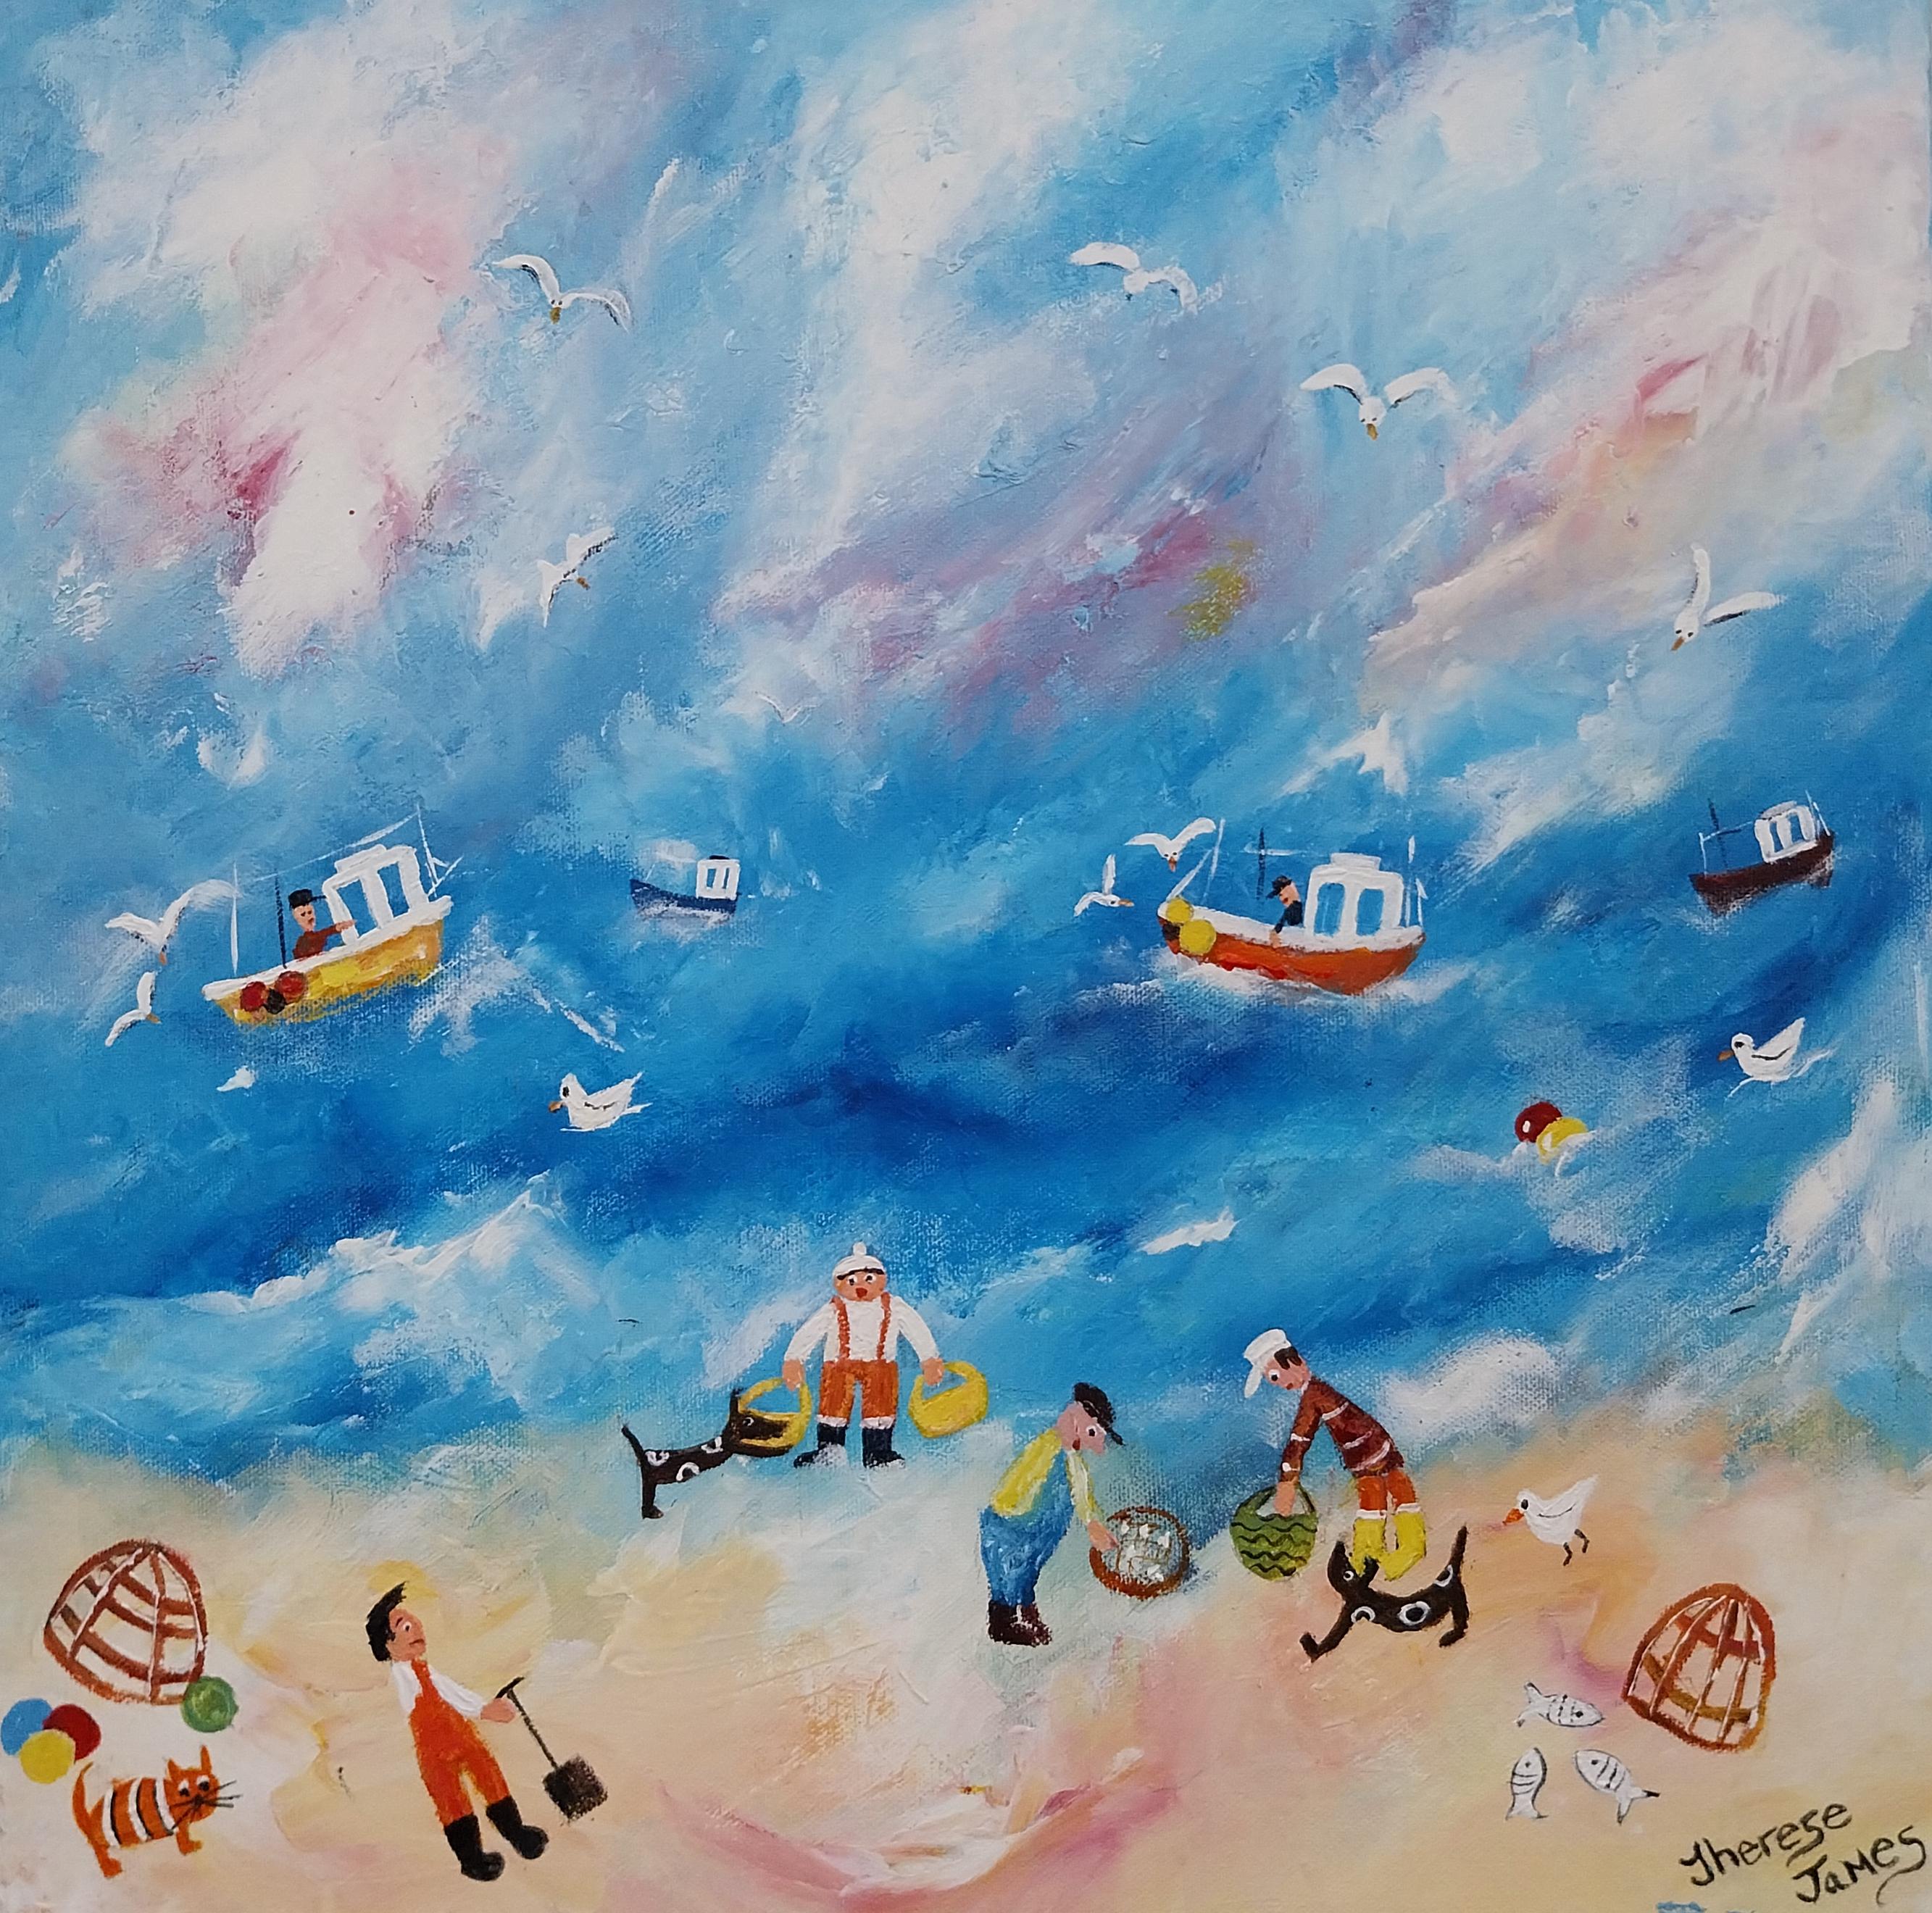 Therese James Figurative Painting - Catch Of The Day:  Contemporary Naive Art Painting